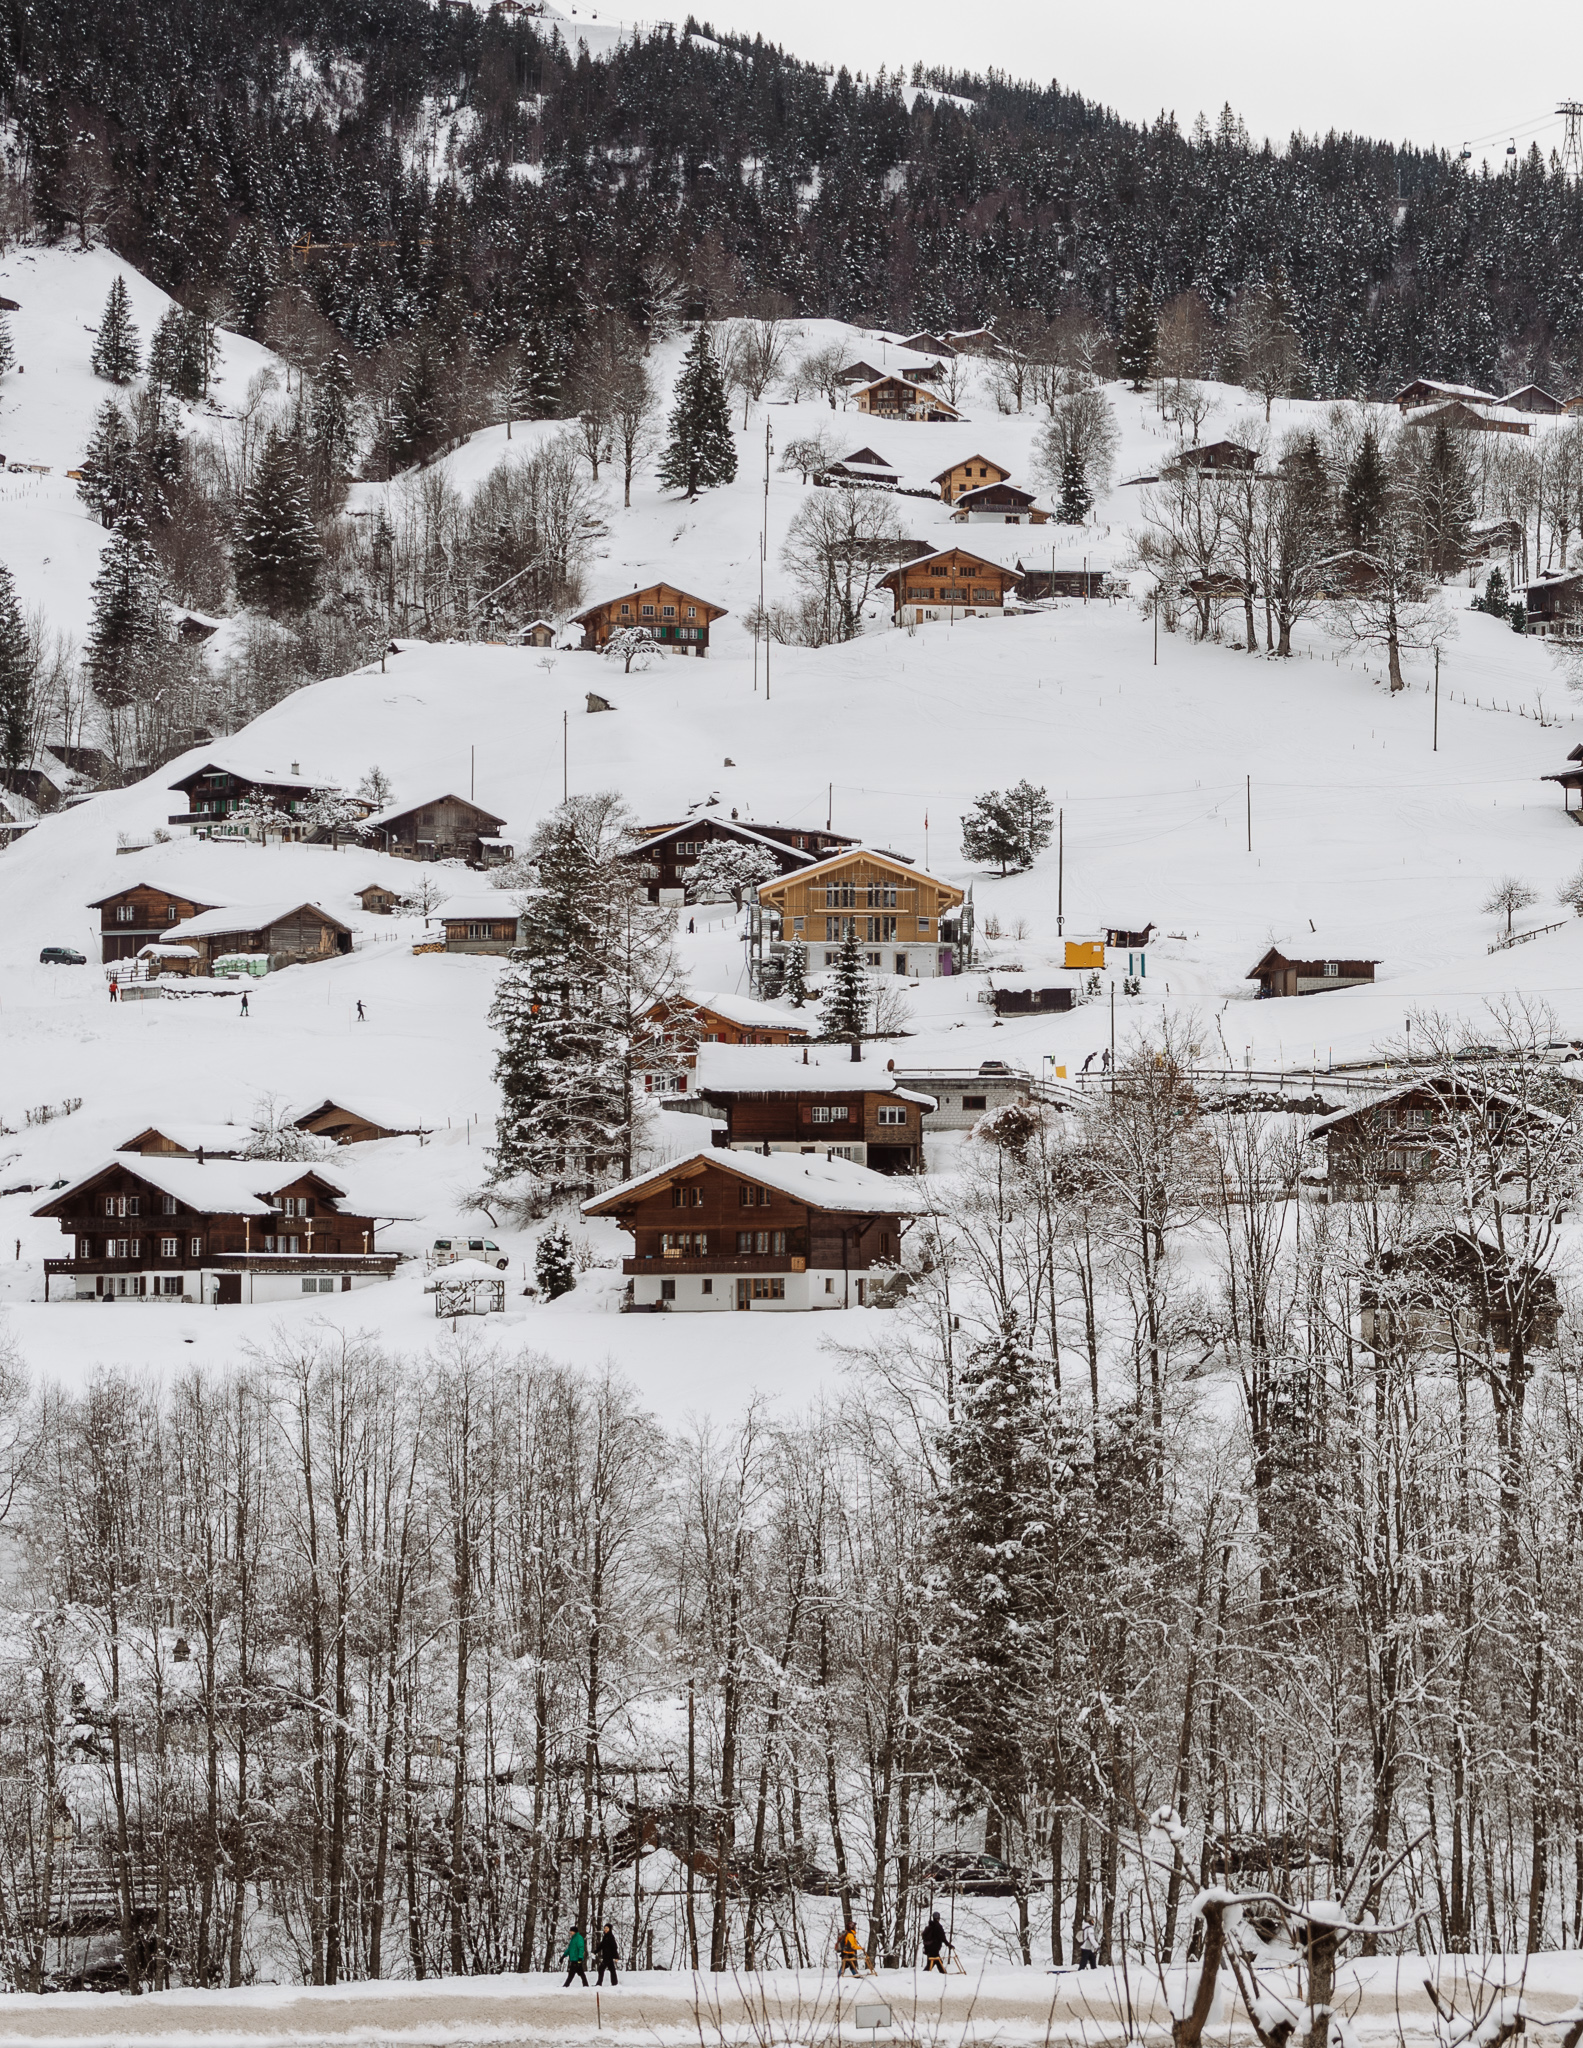 wooden chalets on the hillside in winter. Snow covers the roofs and the hill, and there are trees above the hill also covered in snow.